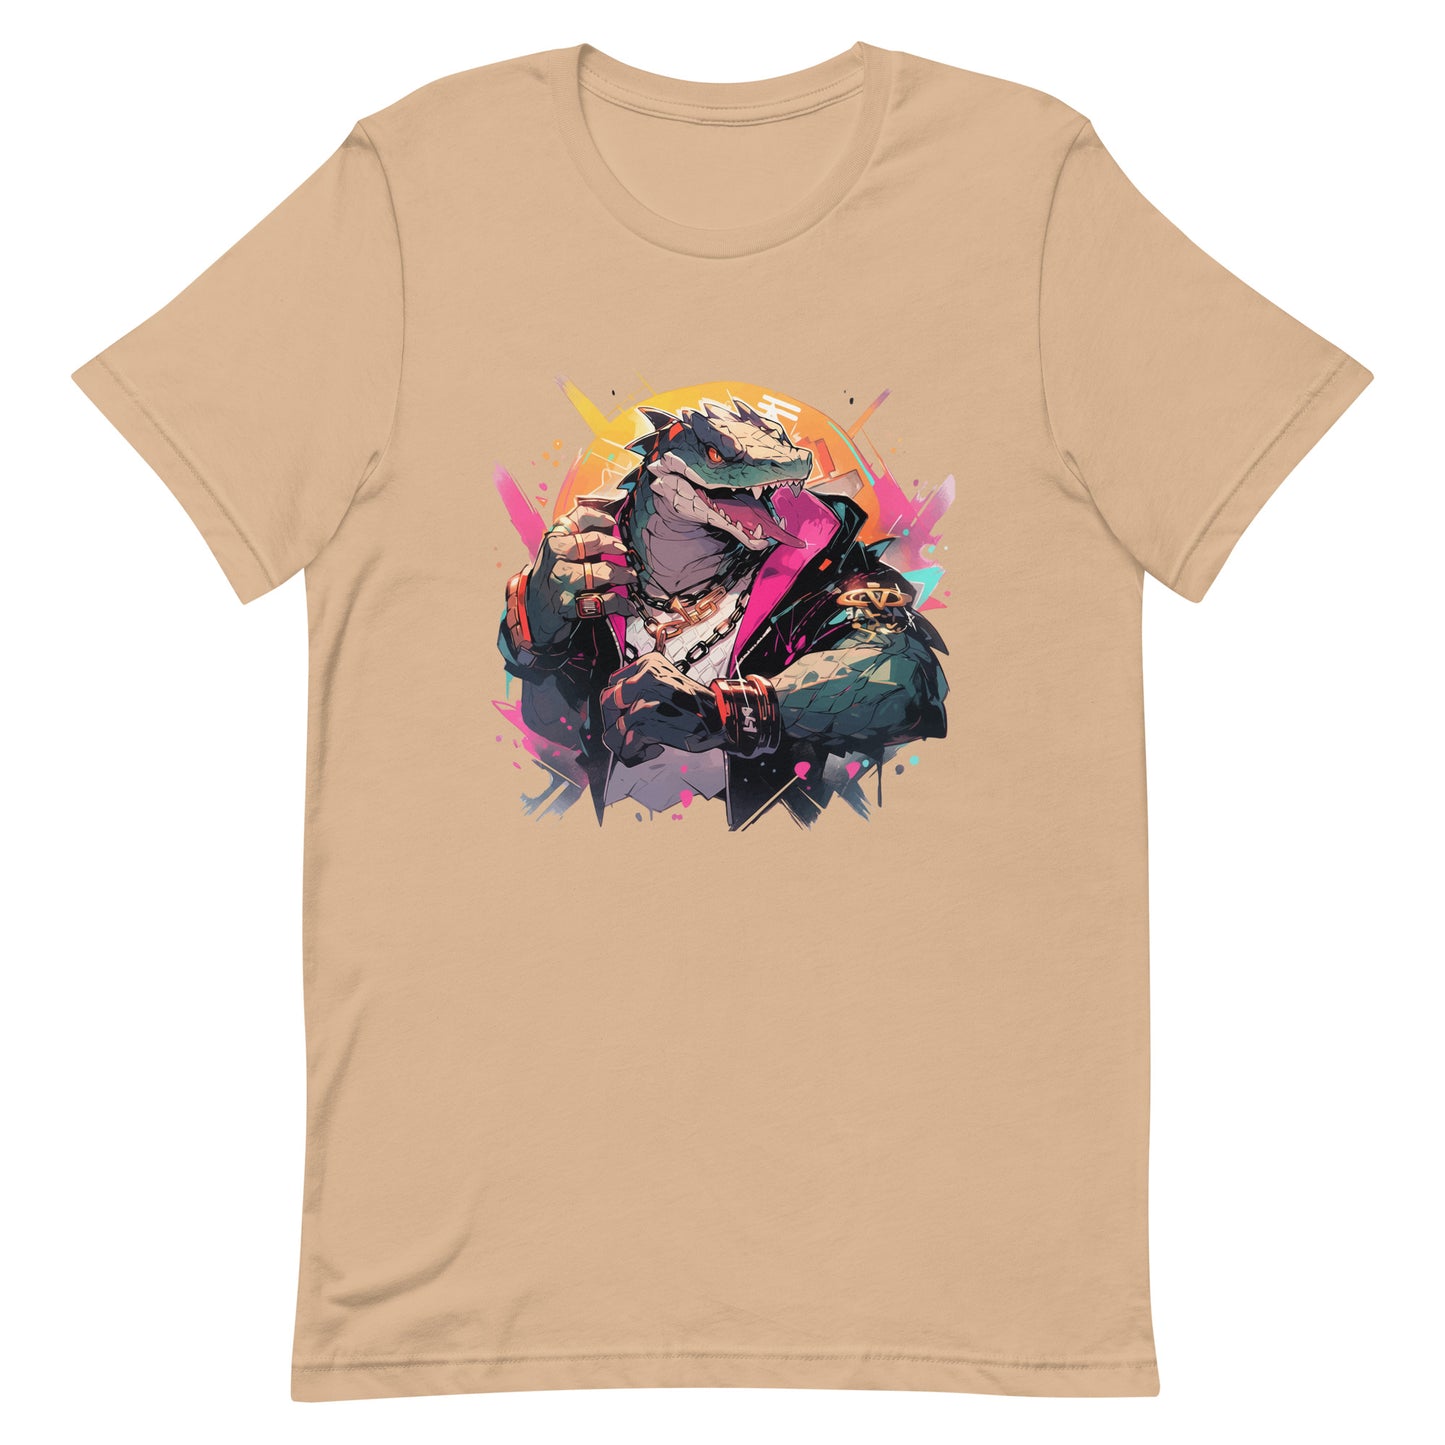 Dangerous and influential reptile, Stylish and rich dino boss bandit, Sharp dragon teeth, Gangster dinosaur and fist fight - Unisex t-shirt